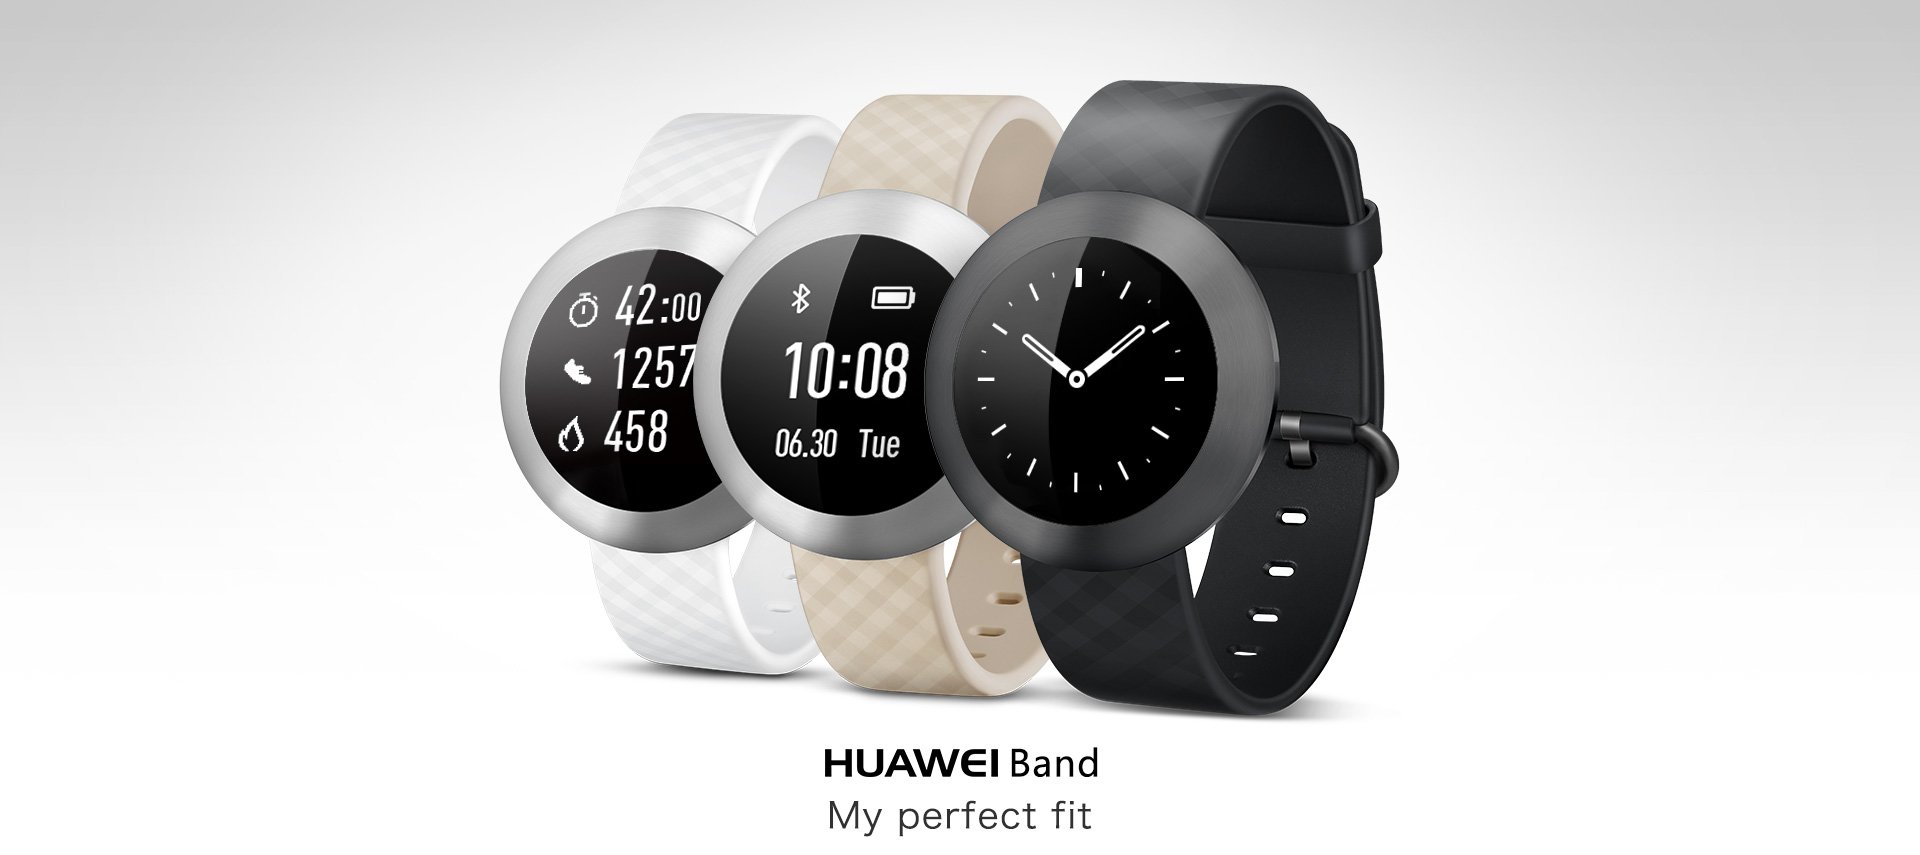 Huawei Band is A Perfect Companion & A Fitness Unit